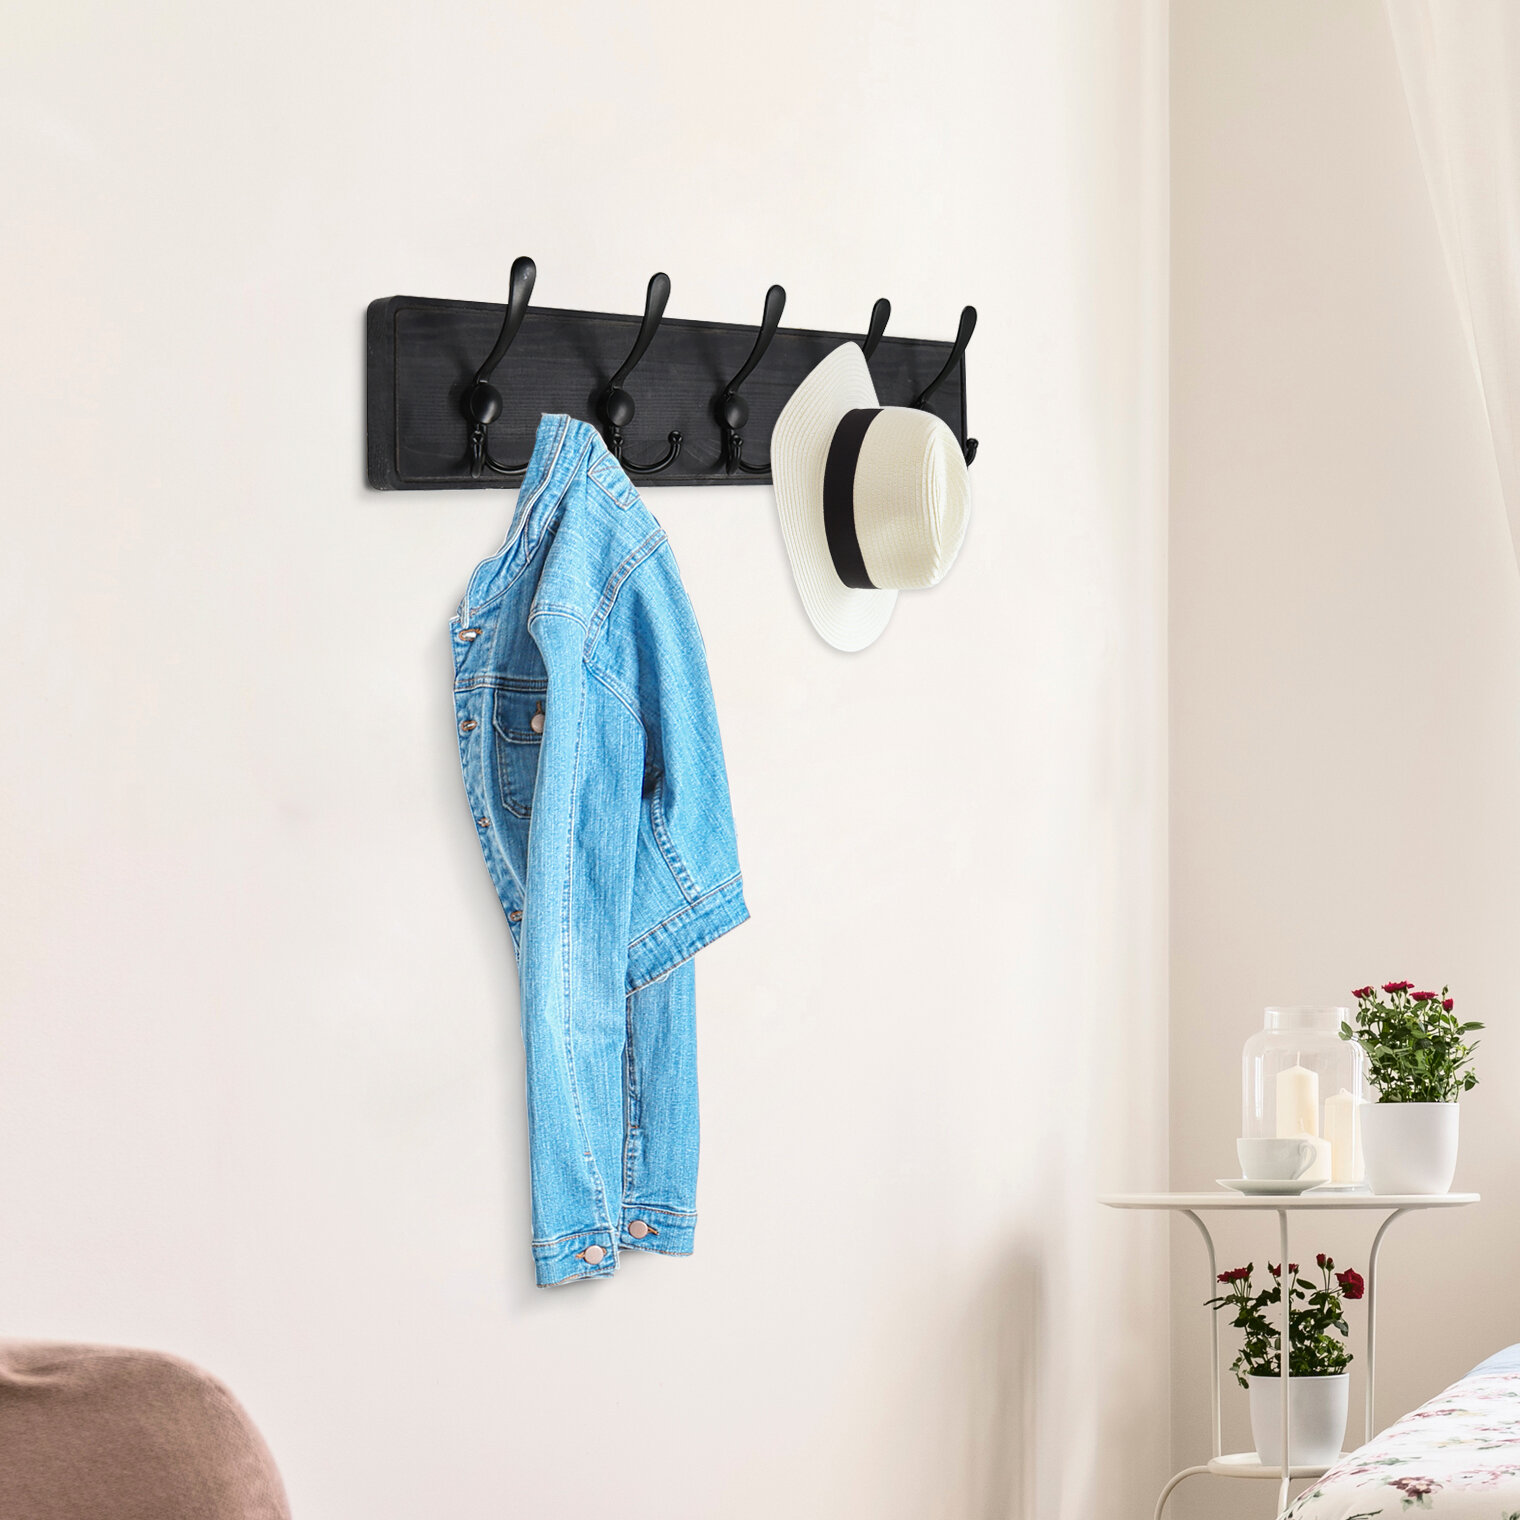 Black Wall Mounted Coat Rack 18 Inch| Mounted Coat rack6 Hook Coat Rack  Wall Mounted for Hanging Coats, Jacket,Hats, Bags, Backpacks, Towels, and  More